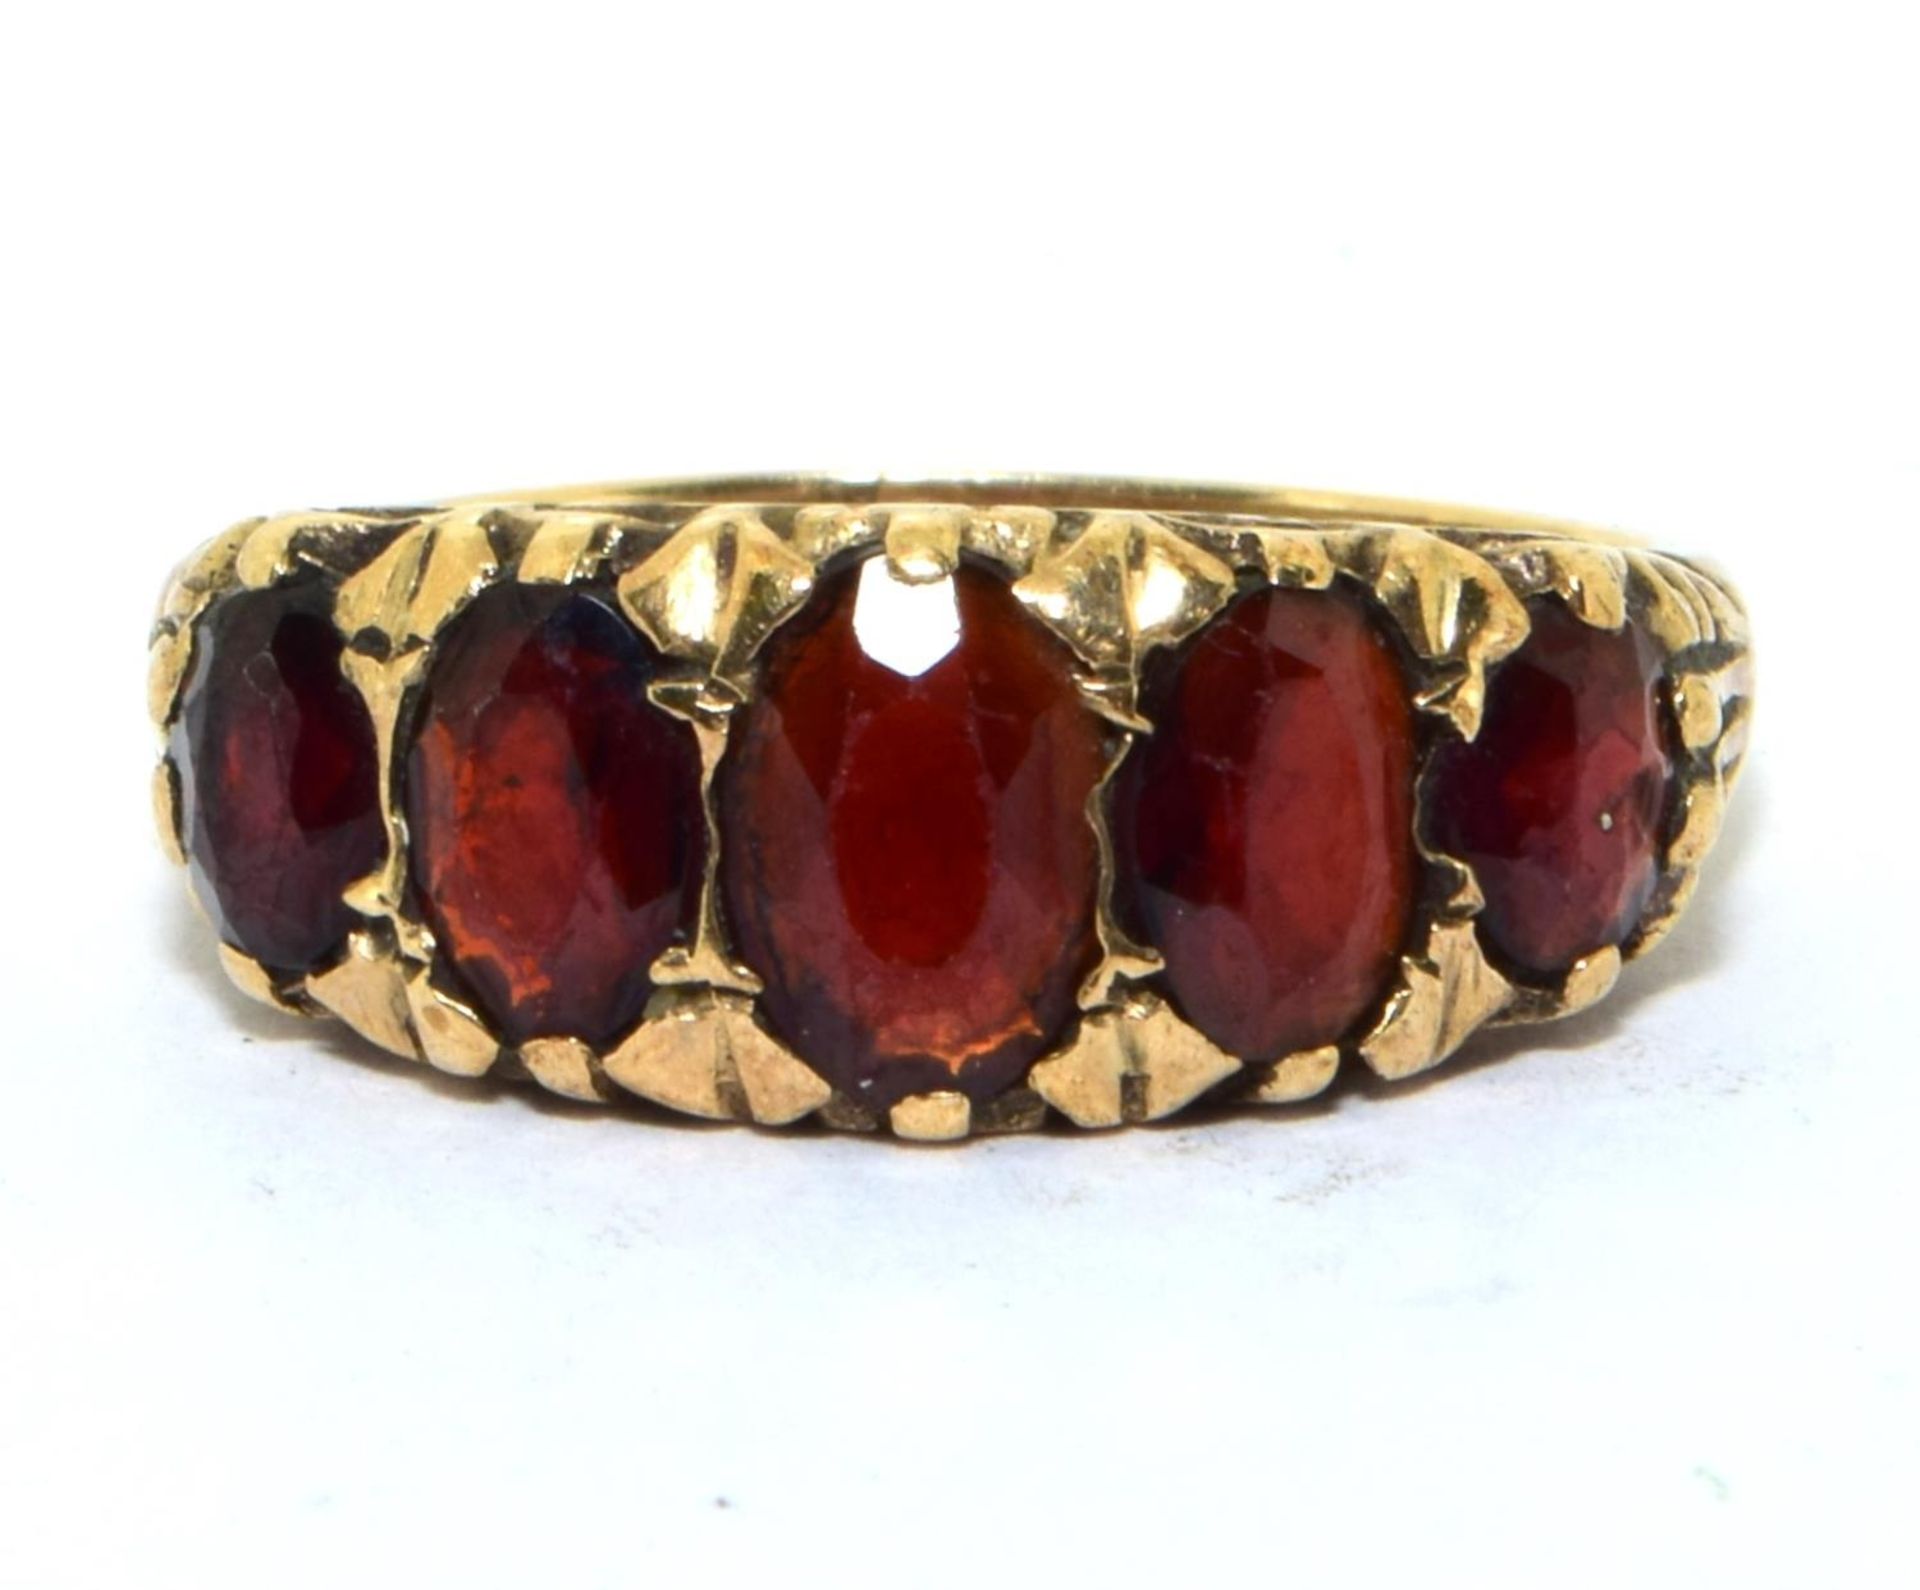 9ct gold Antique 5 stone garnet ring in a scroll setting 4g size O